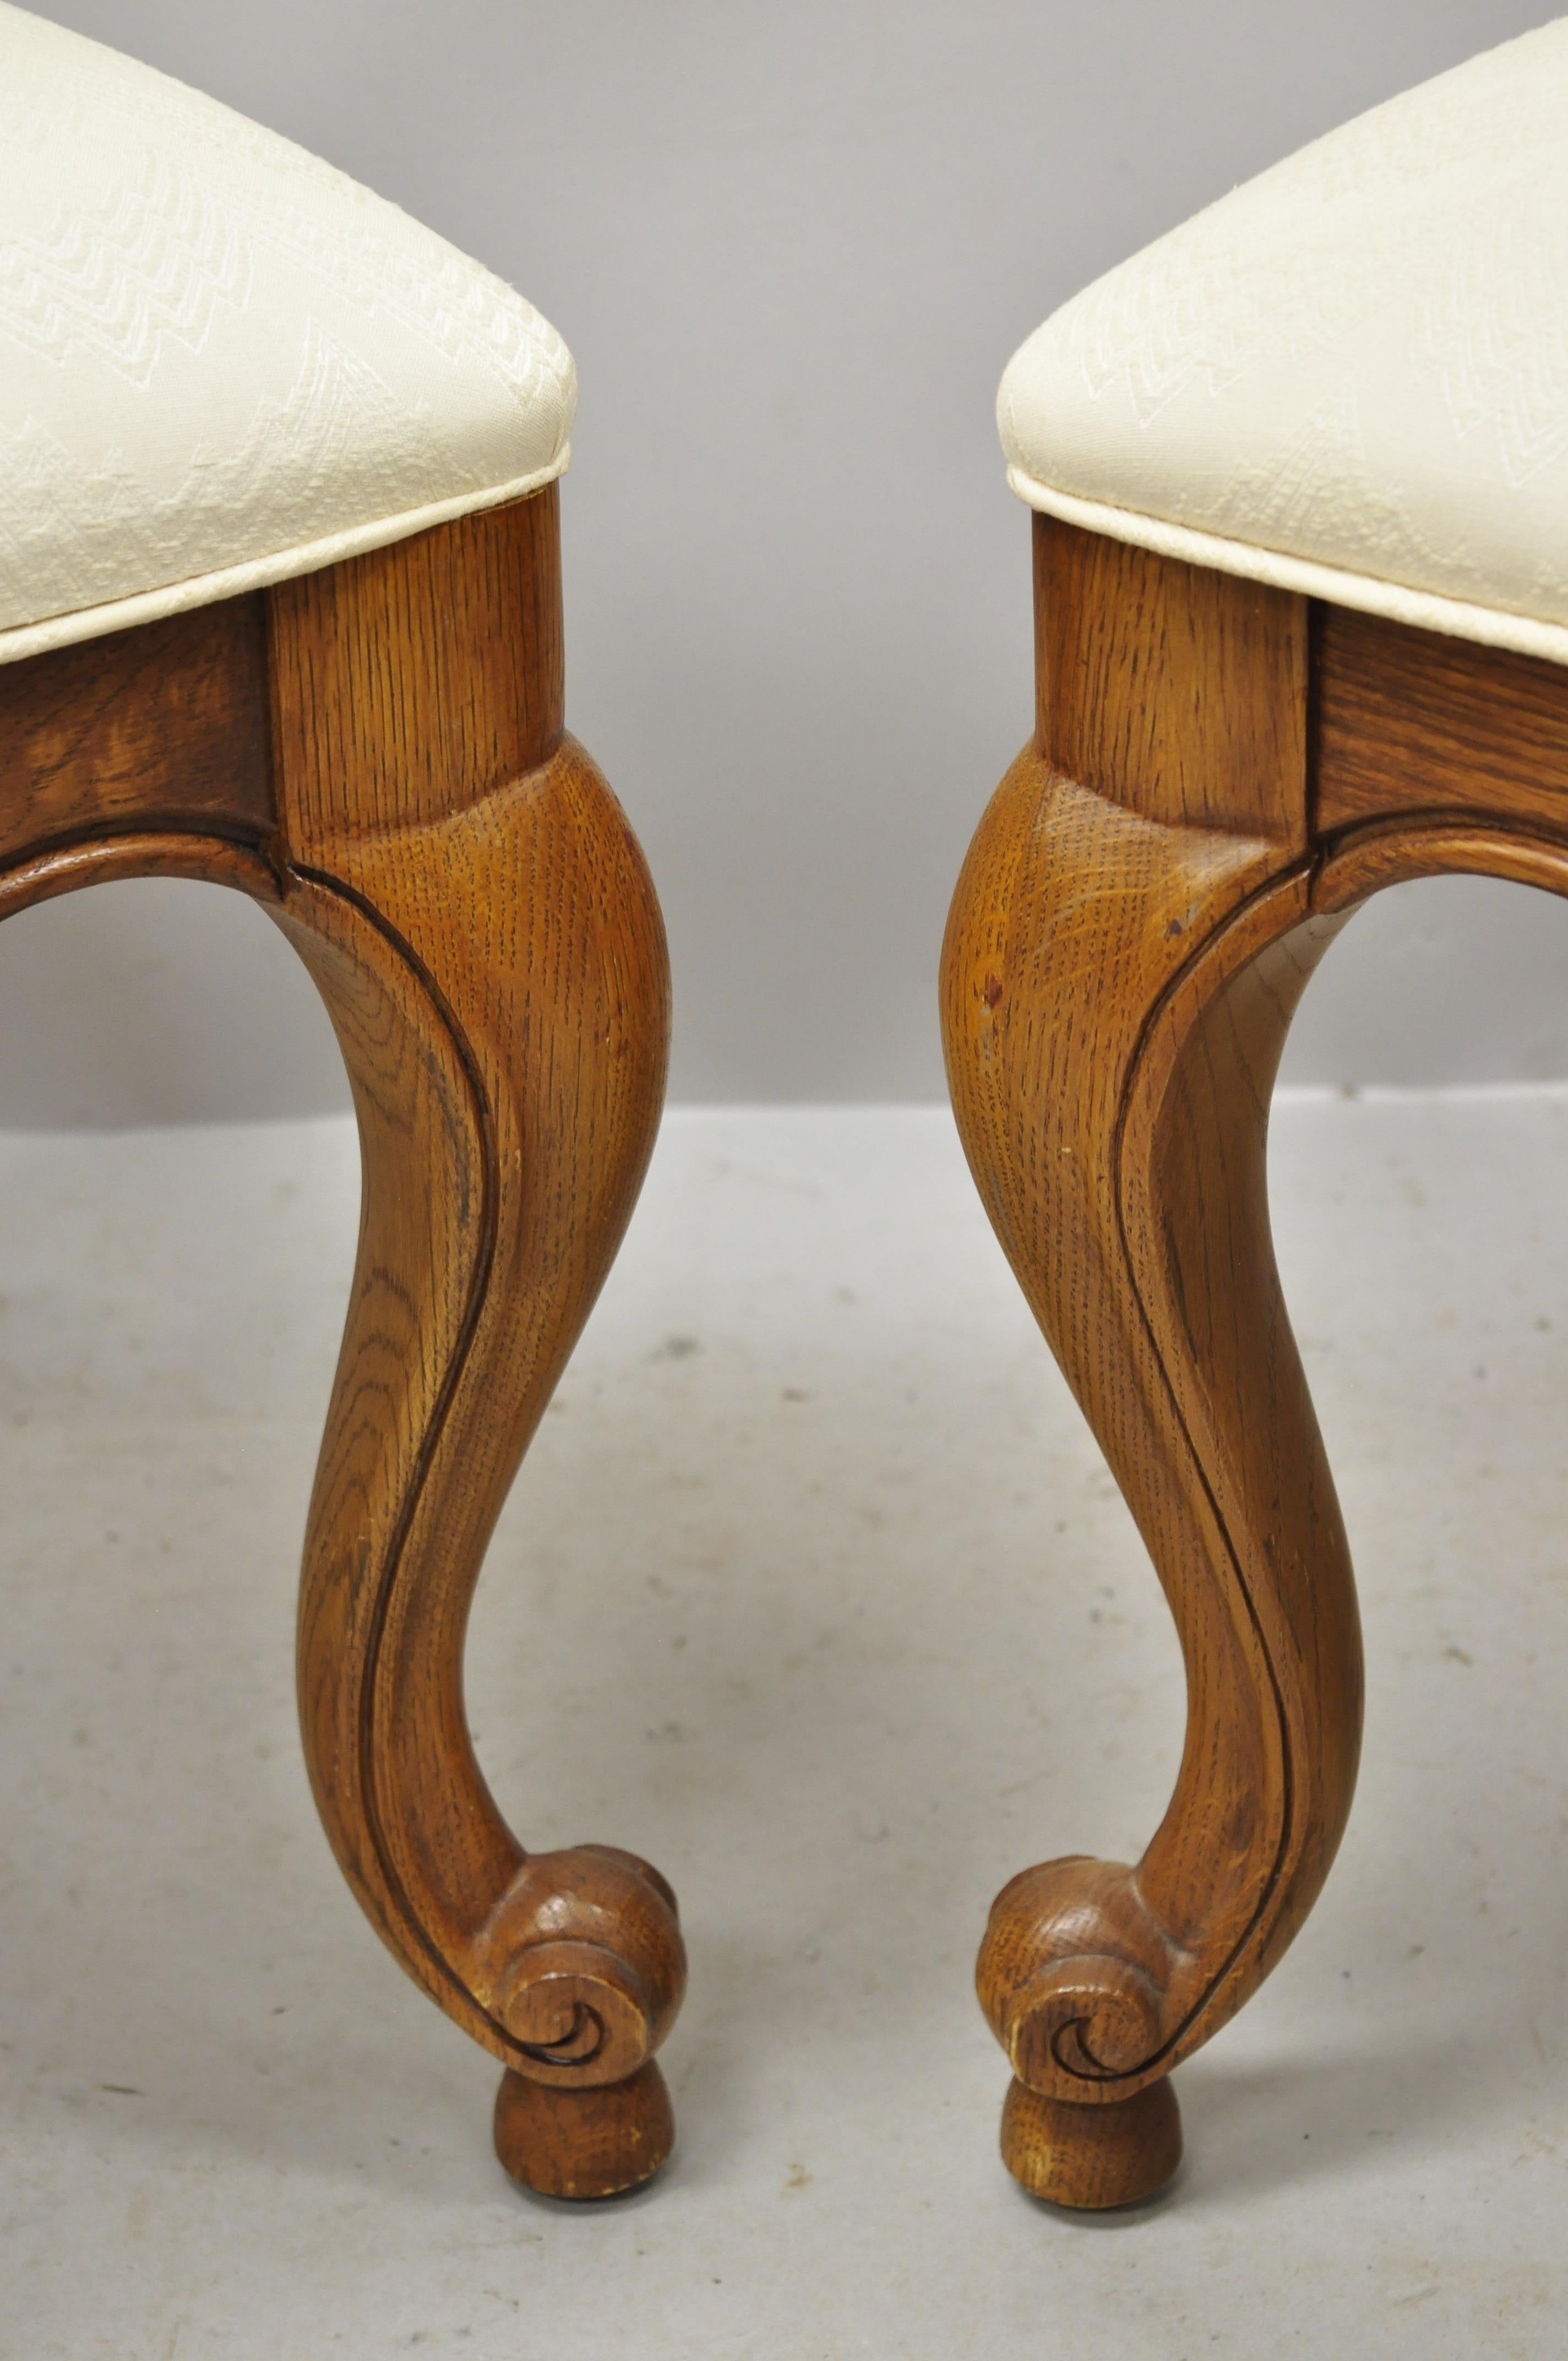 North American Vintage Drexel French Provincial Oakwood Cabriole Leg Stool Bench, a Pair